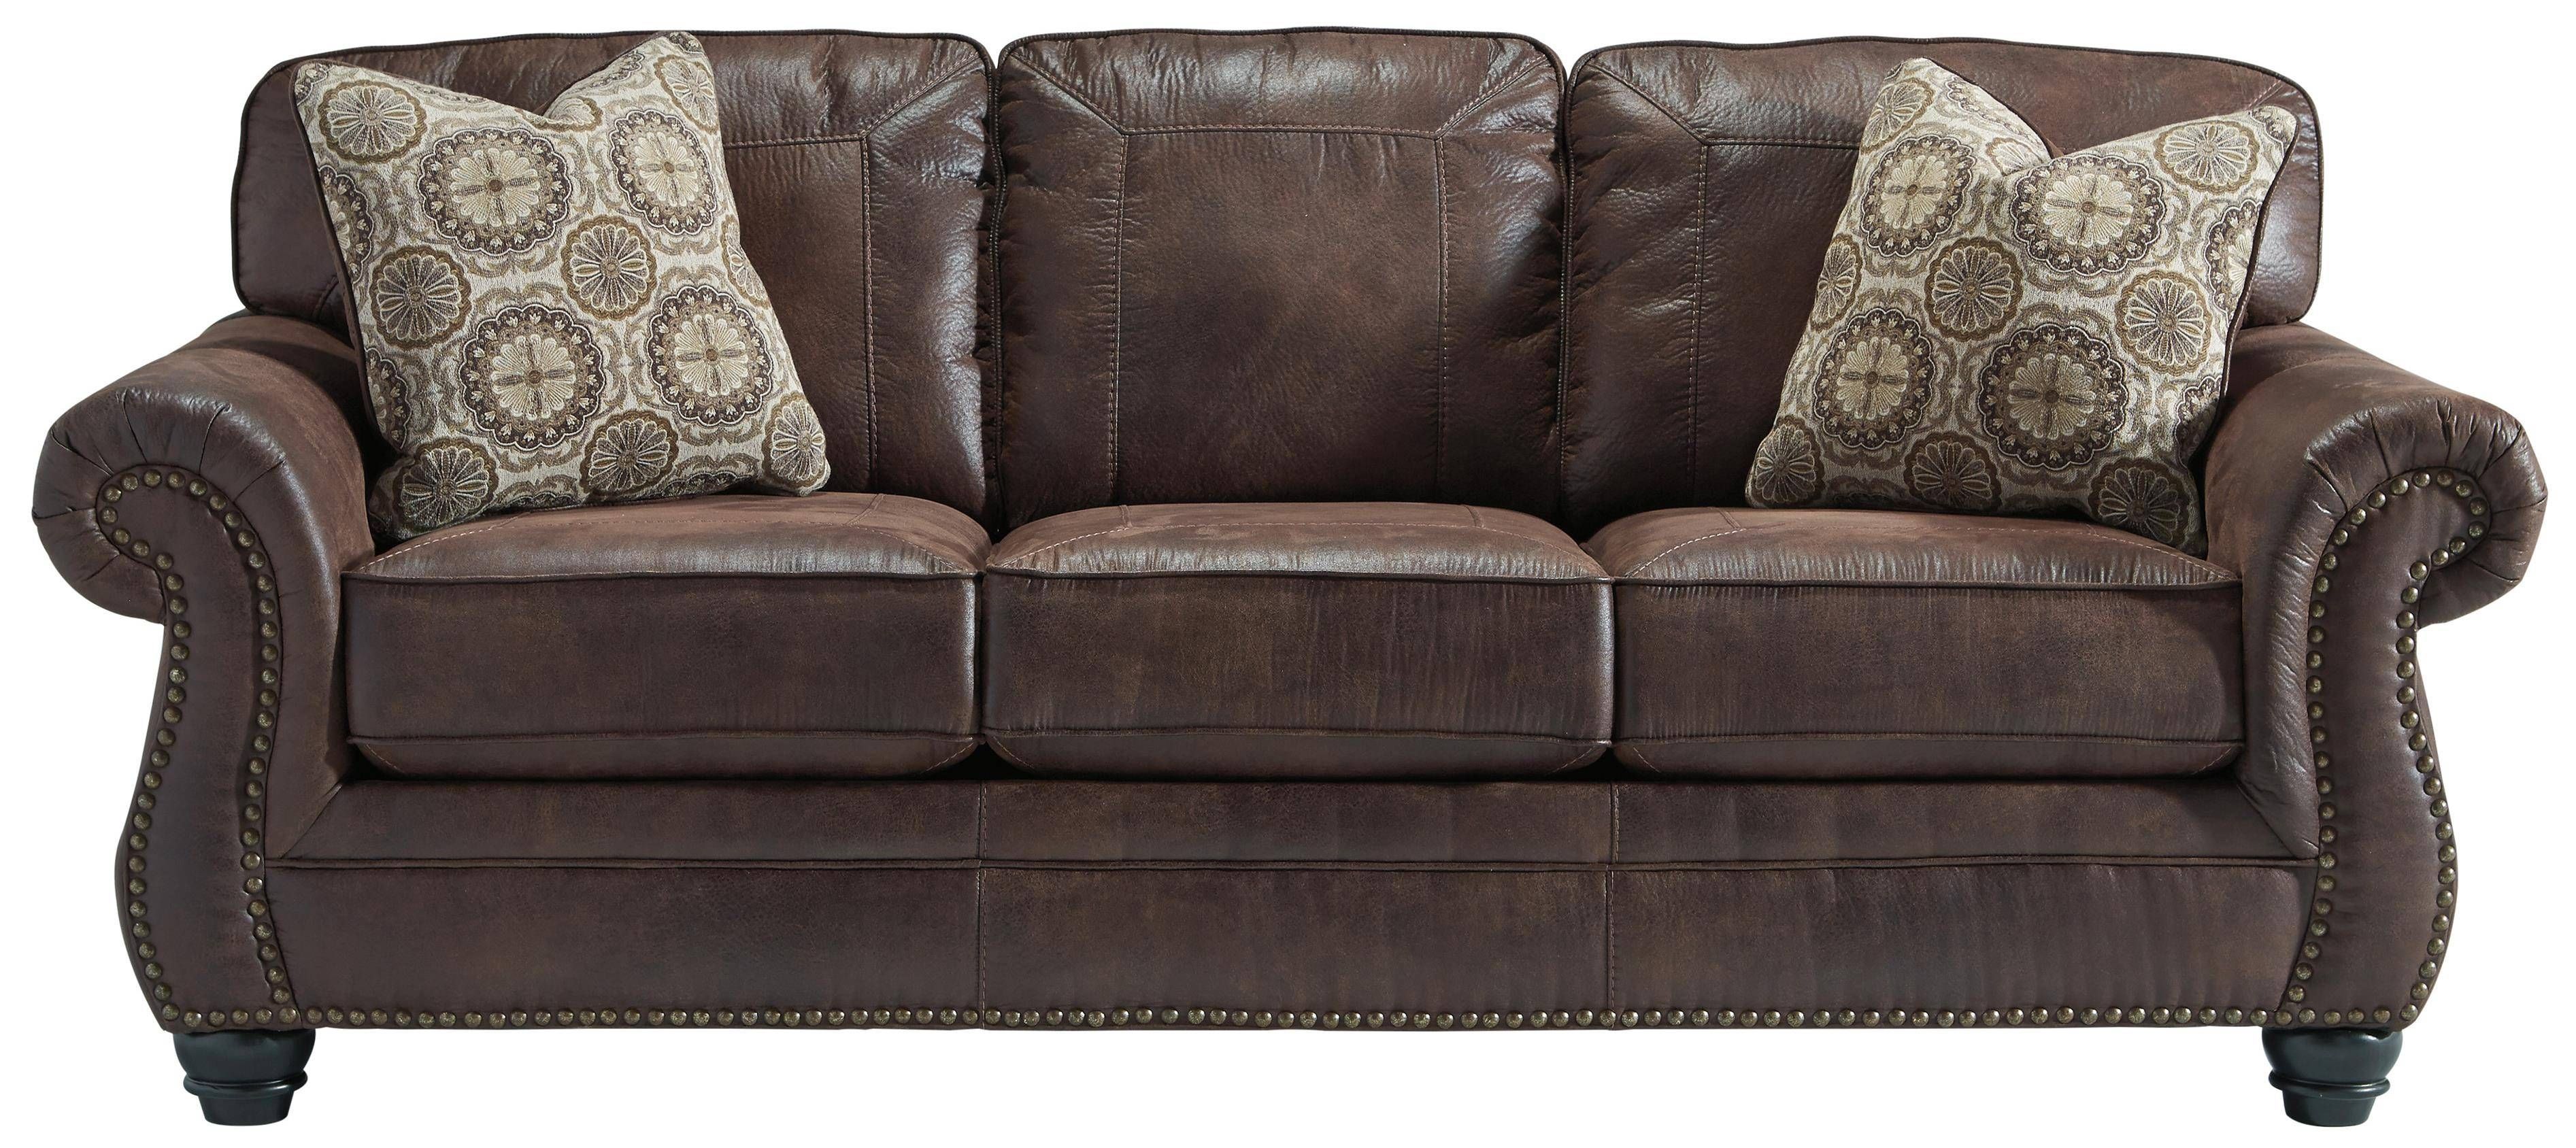 Faux Leather Sofa With Rolled Arms And Nailhead Trimbenchcraft For Brown Leather Sofas With Nailhead Trim (View 5 of 15)